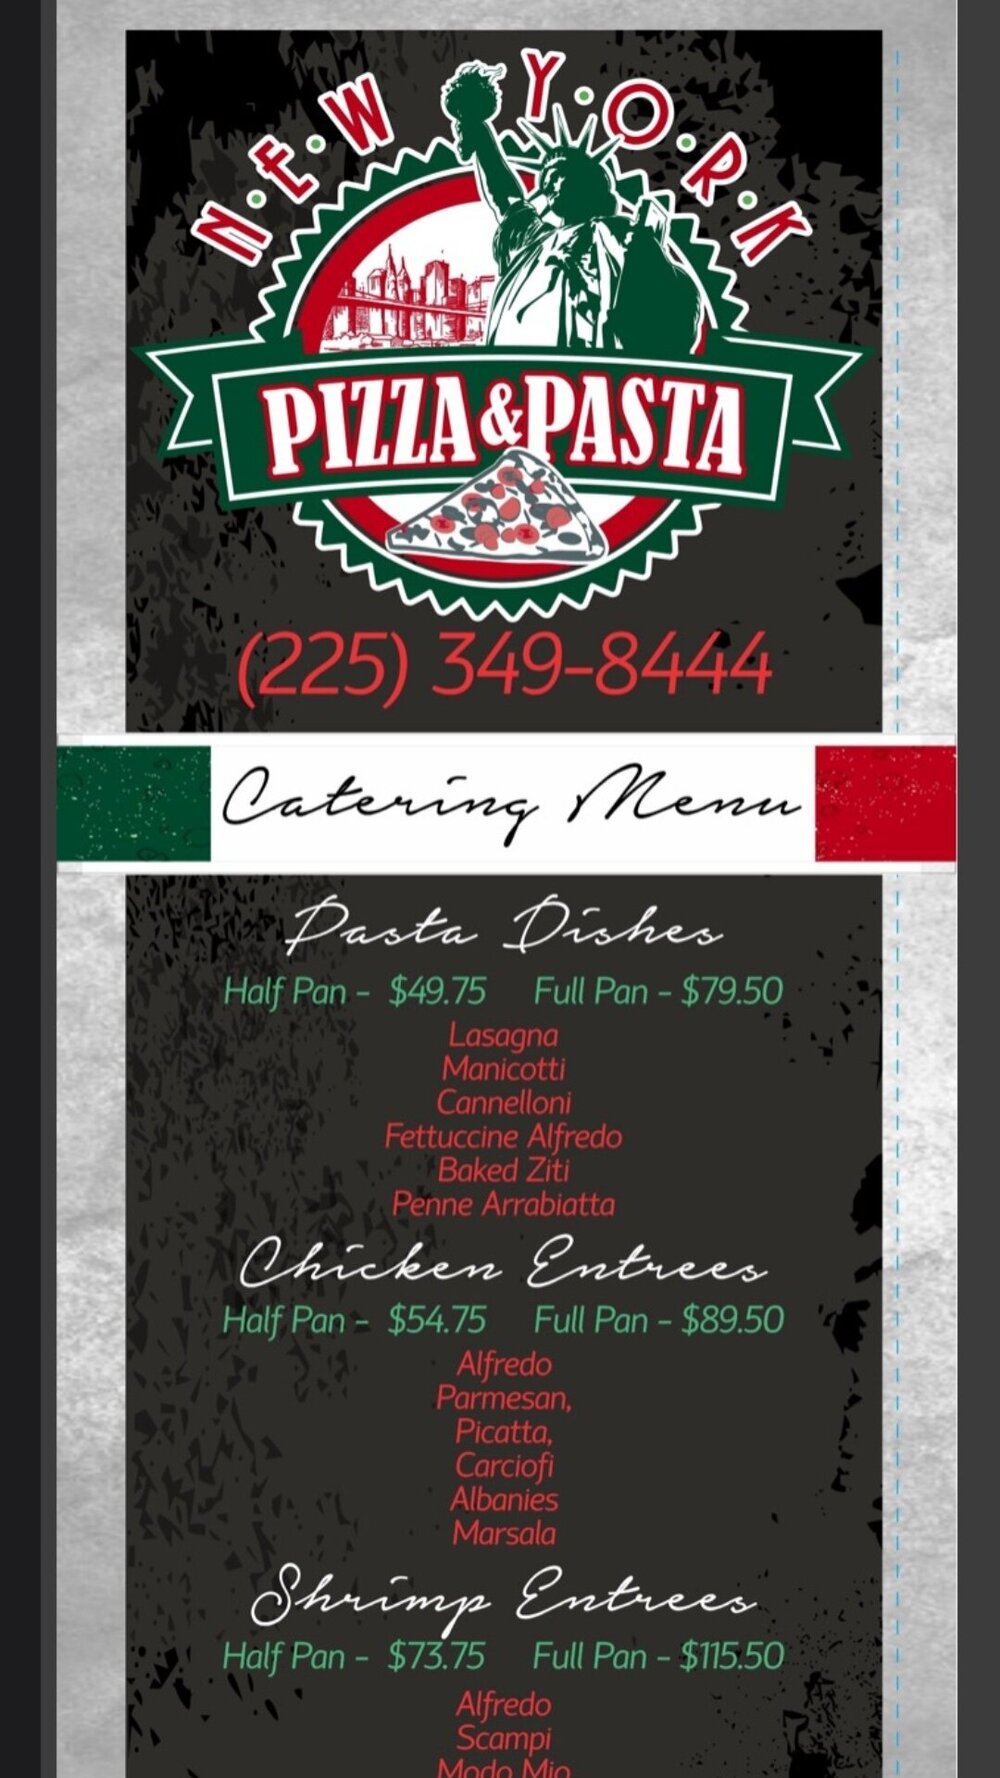 Catering — New York Pizza & Pasta